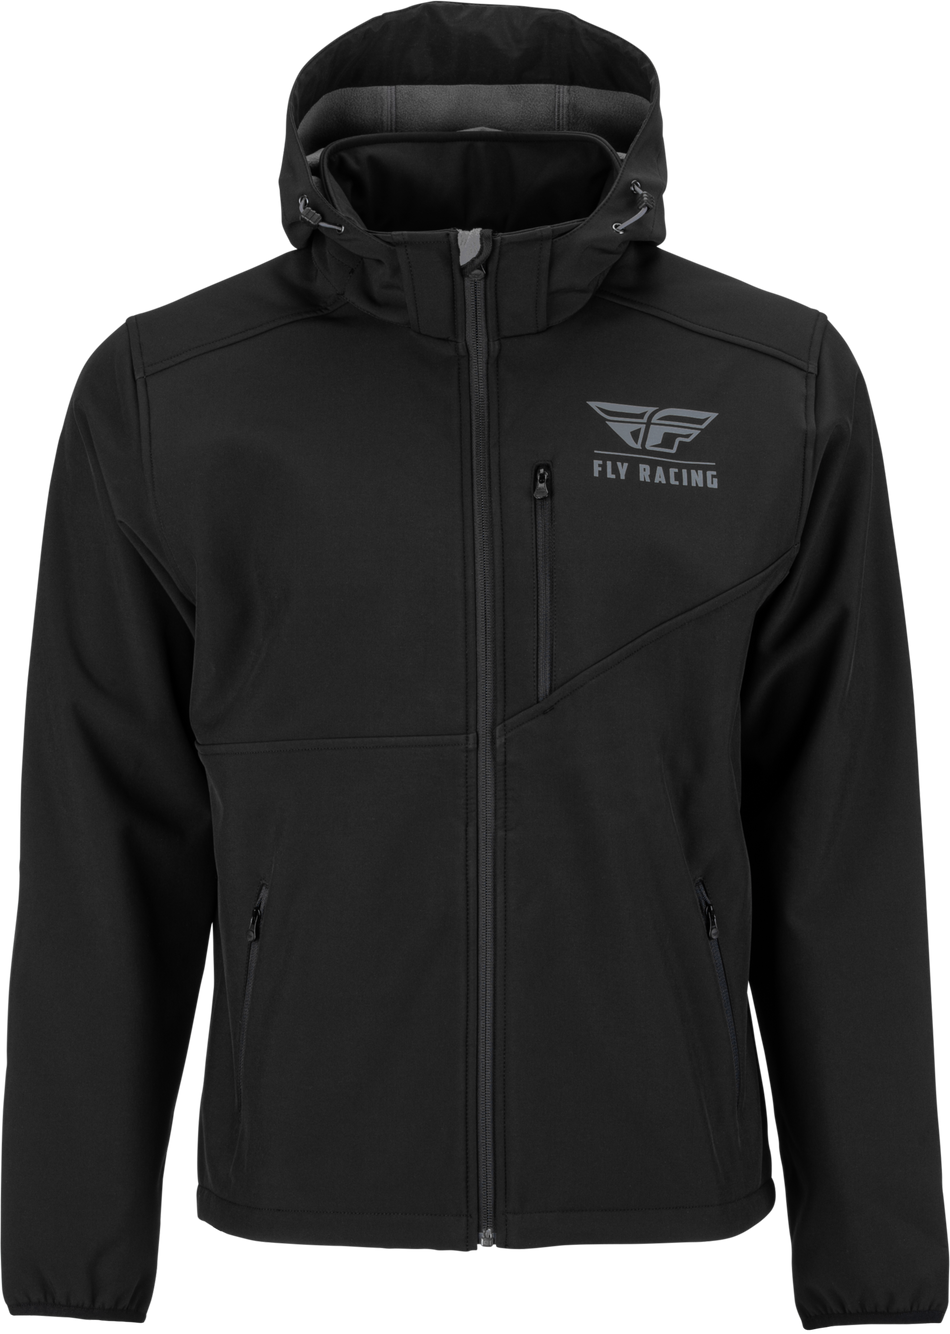 FLY RACING Checkpoint Jacket Black Md 354-6383M